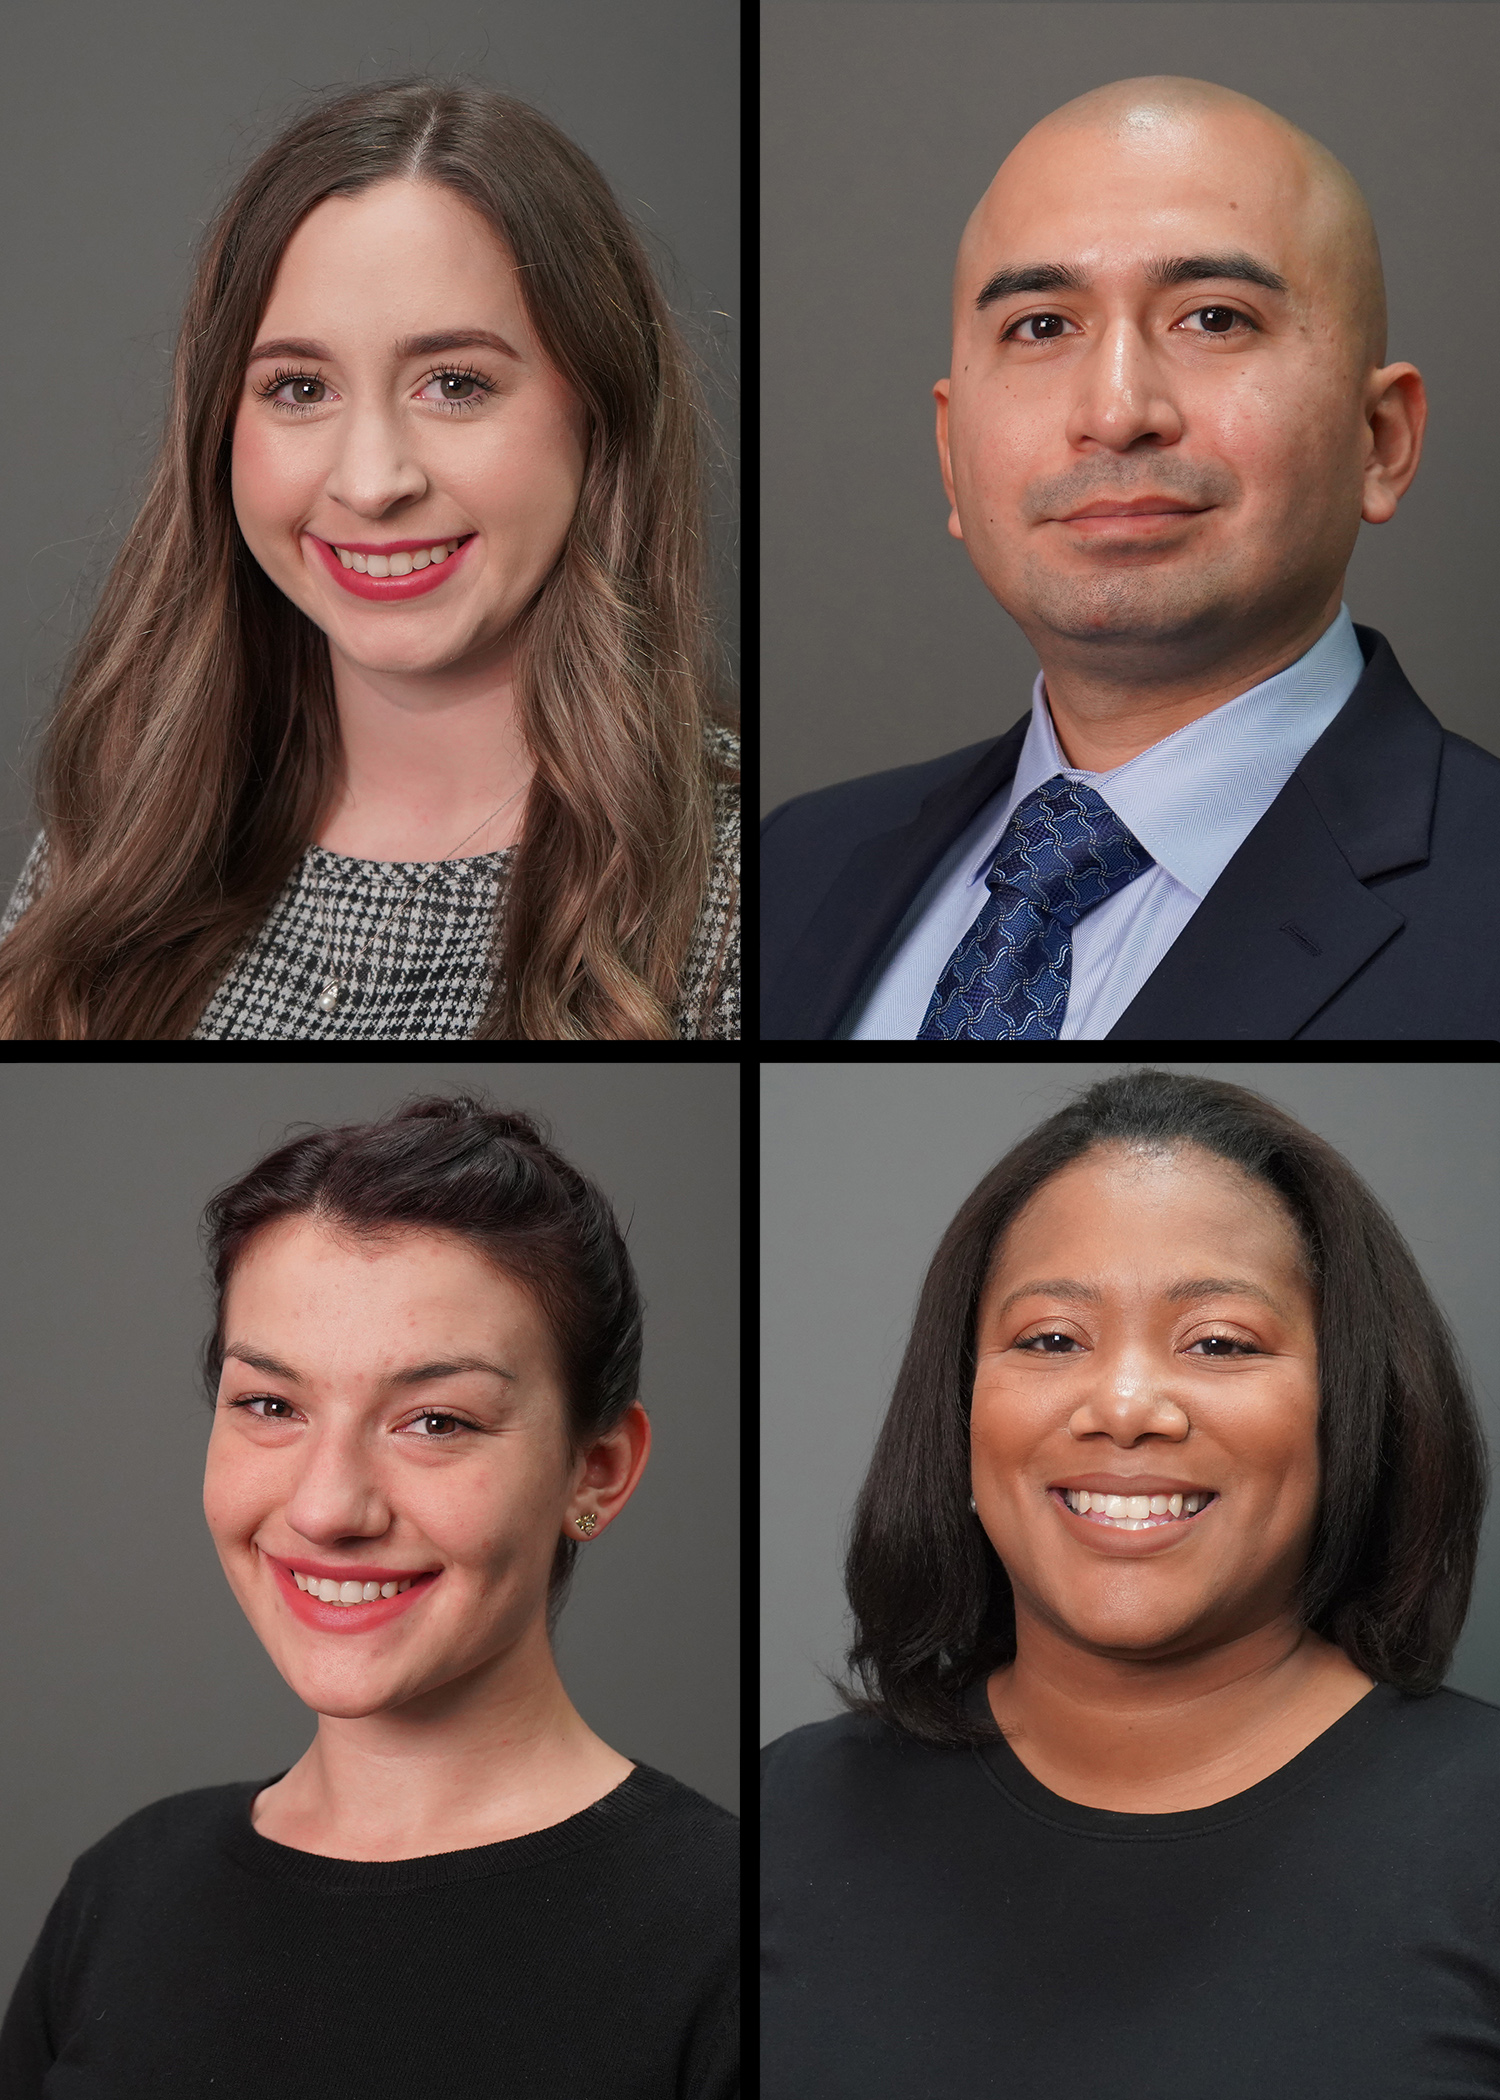 The semi-finalists for the GOAL award at GNTC are (top from left to right) Christina Bullock and Raul Soto (bottom from left to right) Stephanie Tarbous and Tatiana Edwards. 